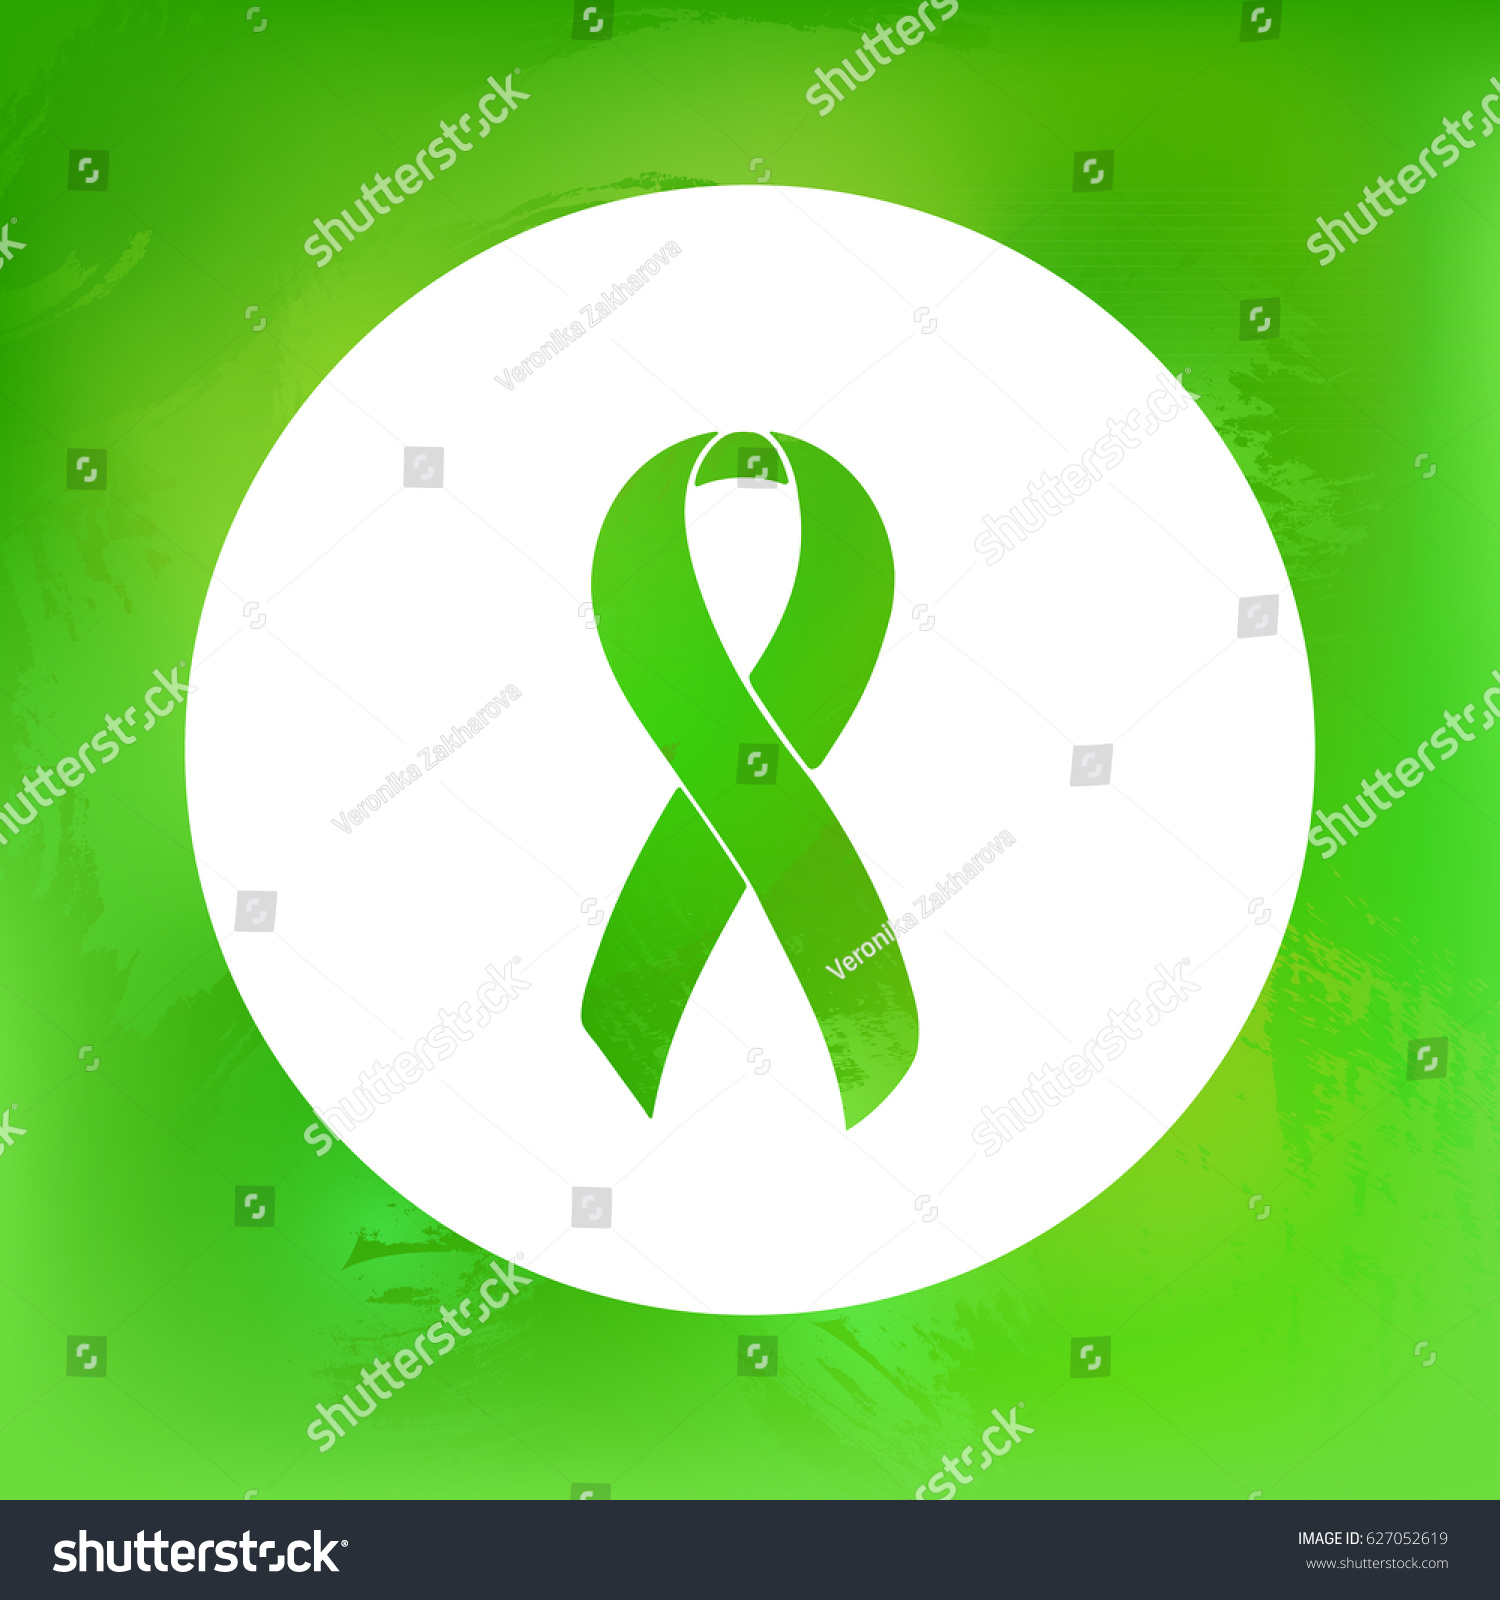 SVG of Green Awareness Ribbon. Depression, Gastroparesis, Glaucoma, Leukemia, Literacy, Mental Illness, Tissue Donation, Cerebral Palsy, Adrenal, Dwarfism. Isolated icon. Watercolor painted background. svg